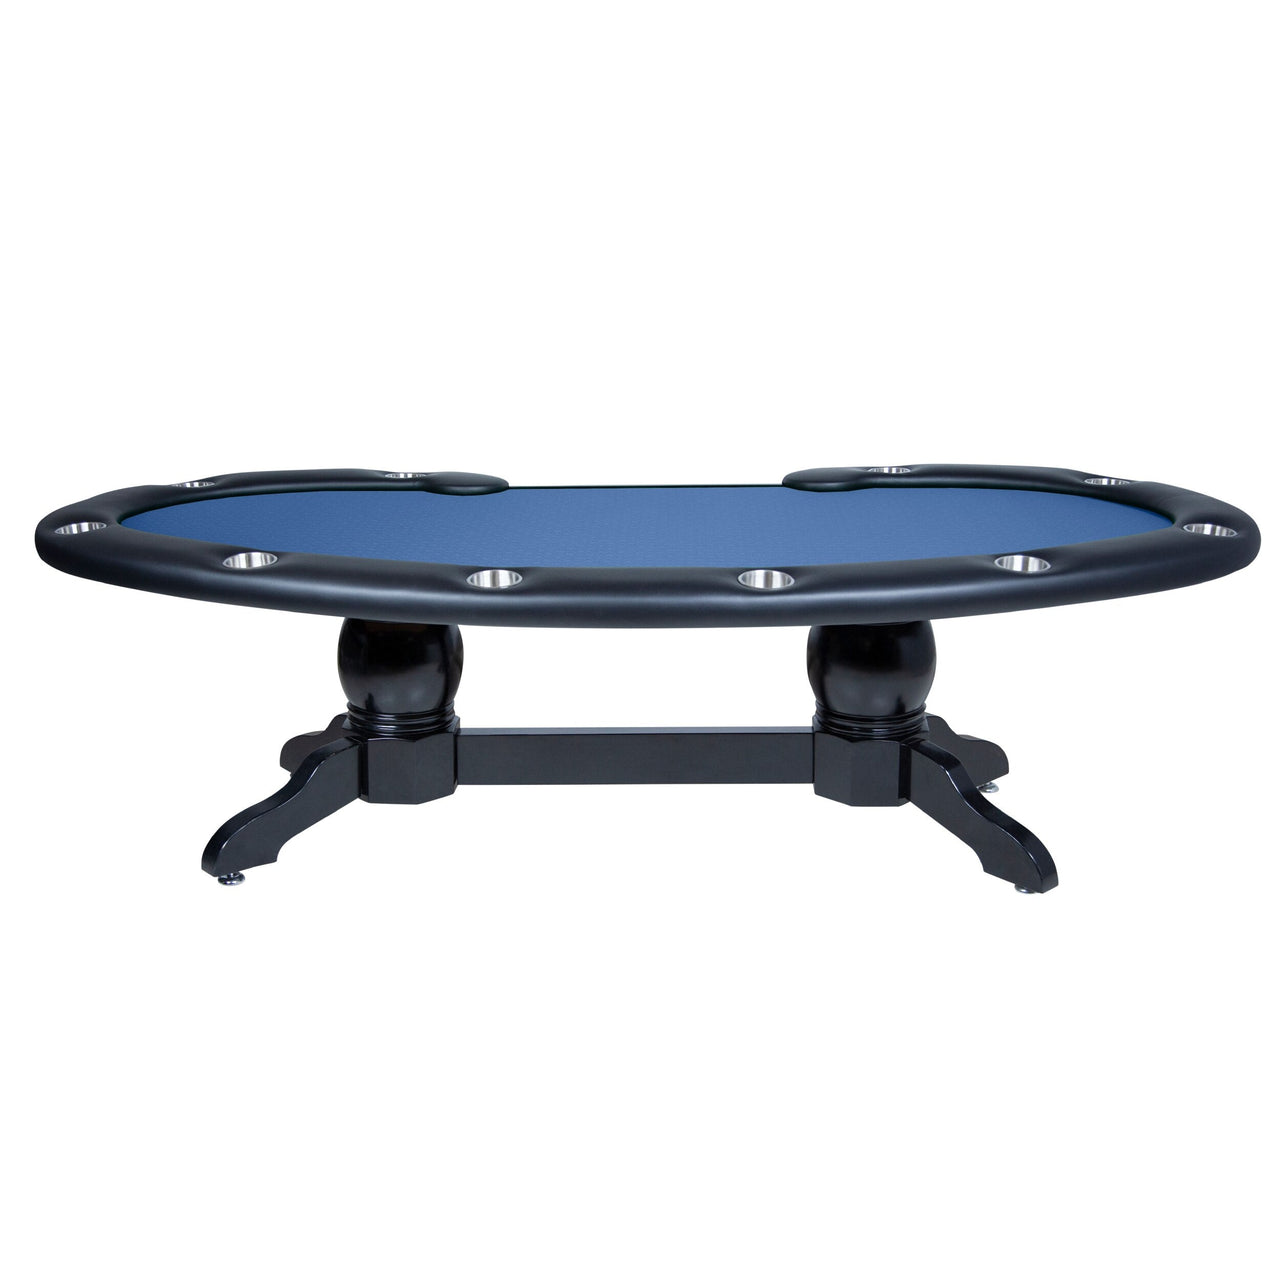 Prestige X Poker Table with Dining Top-AMERICANA-POKER-TABLES